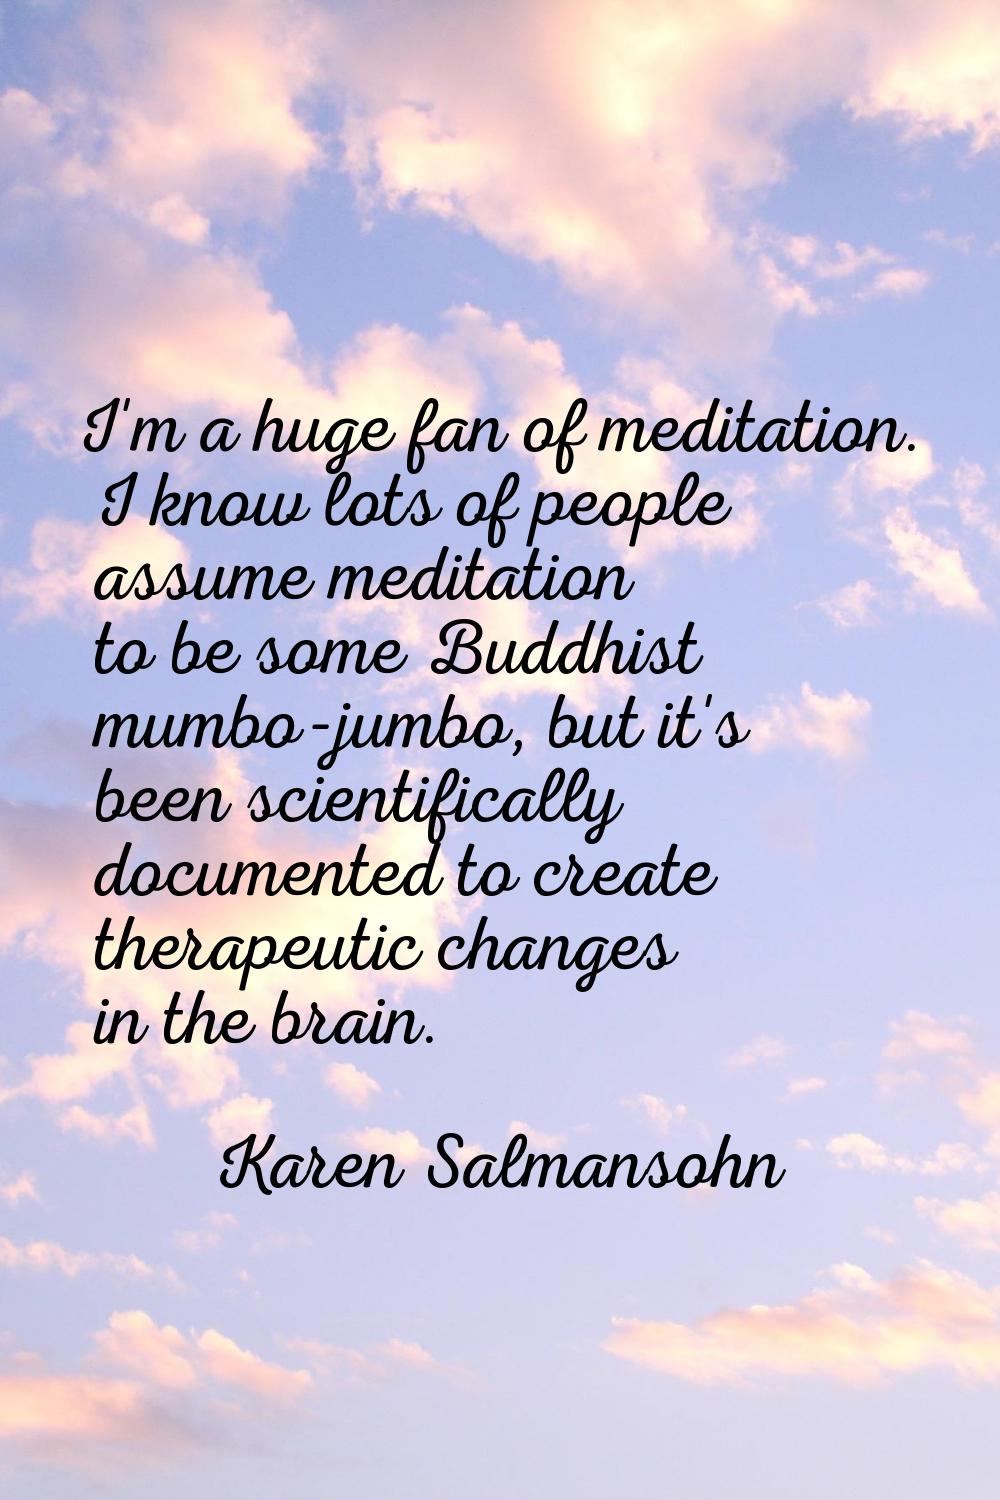 I'm a huge fan of meditation. I know lots of people assume meditation to be some Buddhist mumbo-jum